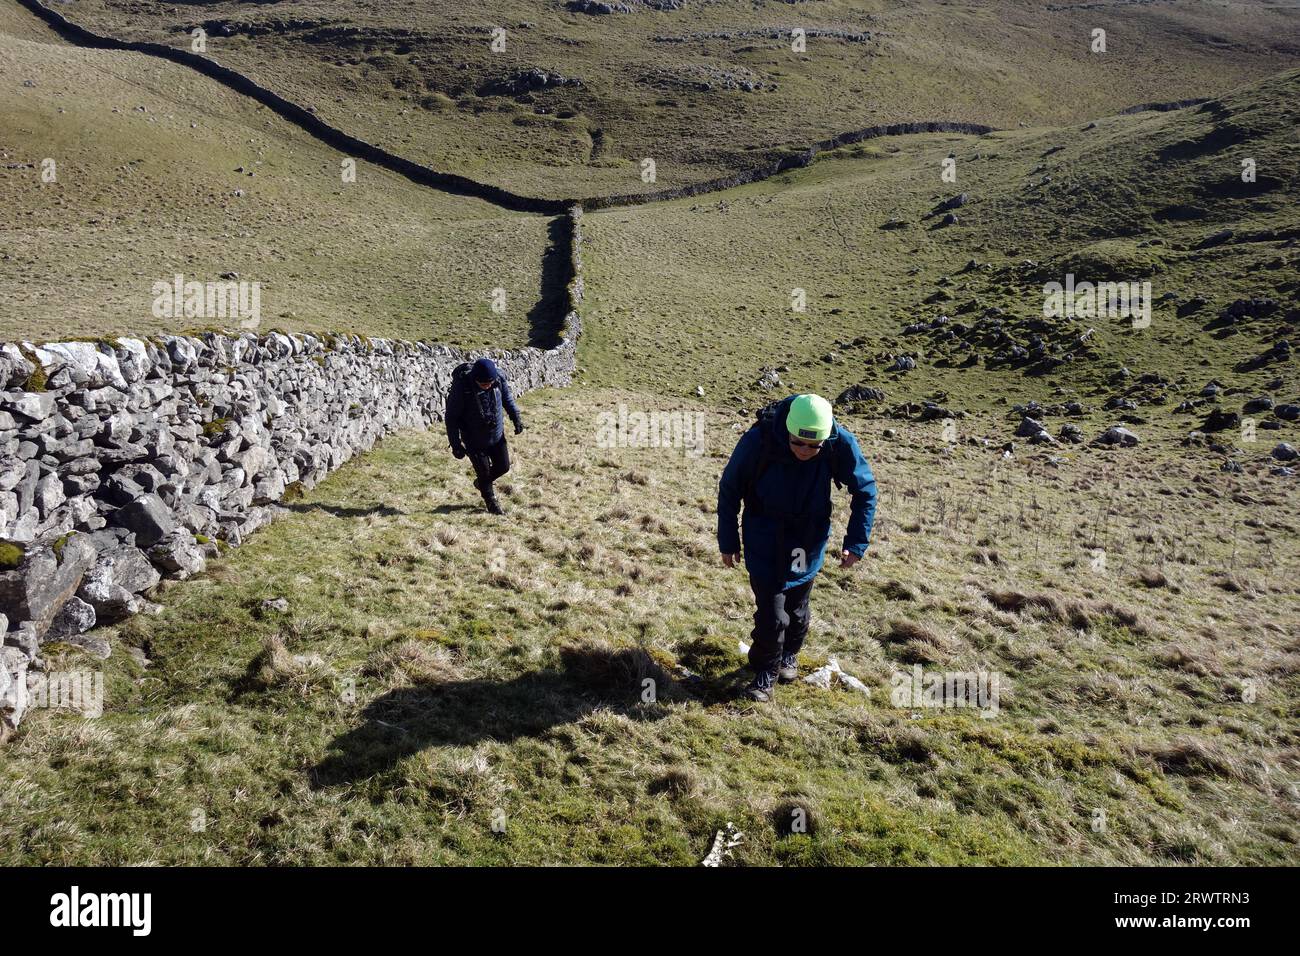 Two Men (Hikers) Climbing by Stone Wall in the Summit of 'Proctor High Mark' near Malham, Yorkshire Dales National Park, England, UK Stock Photo